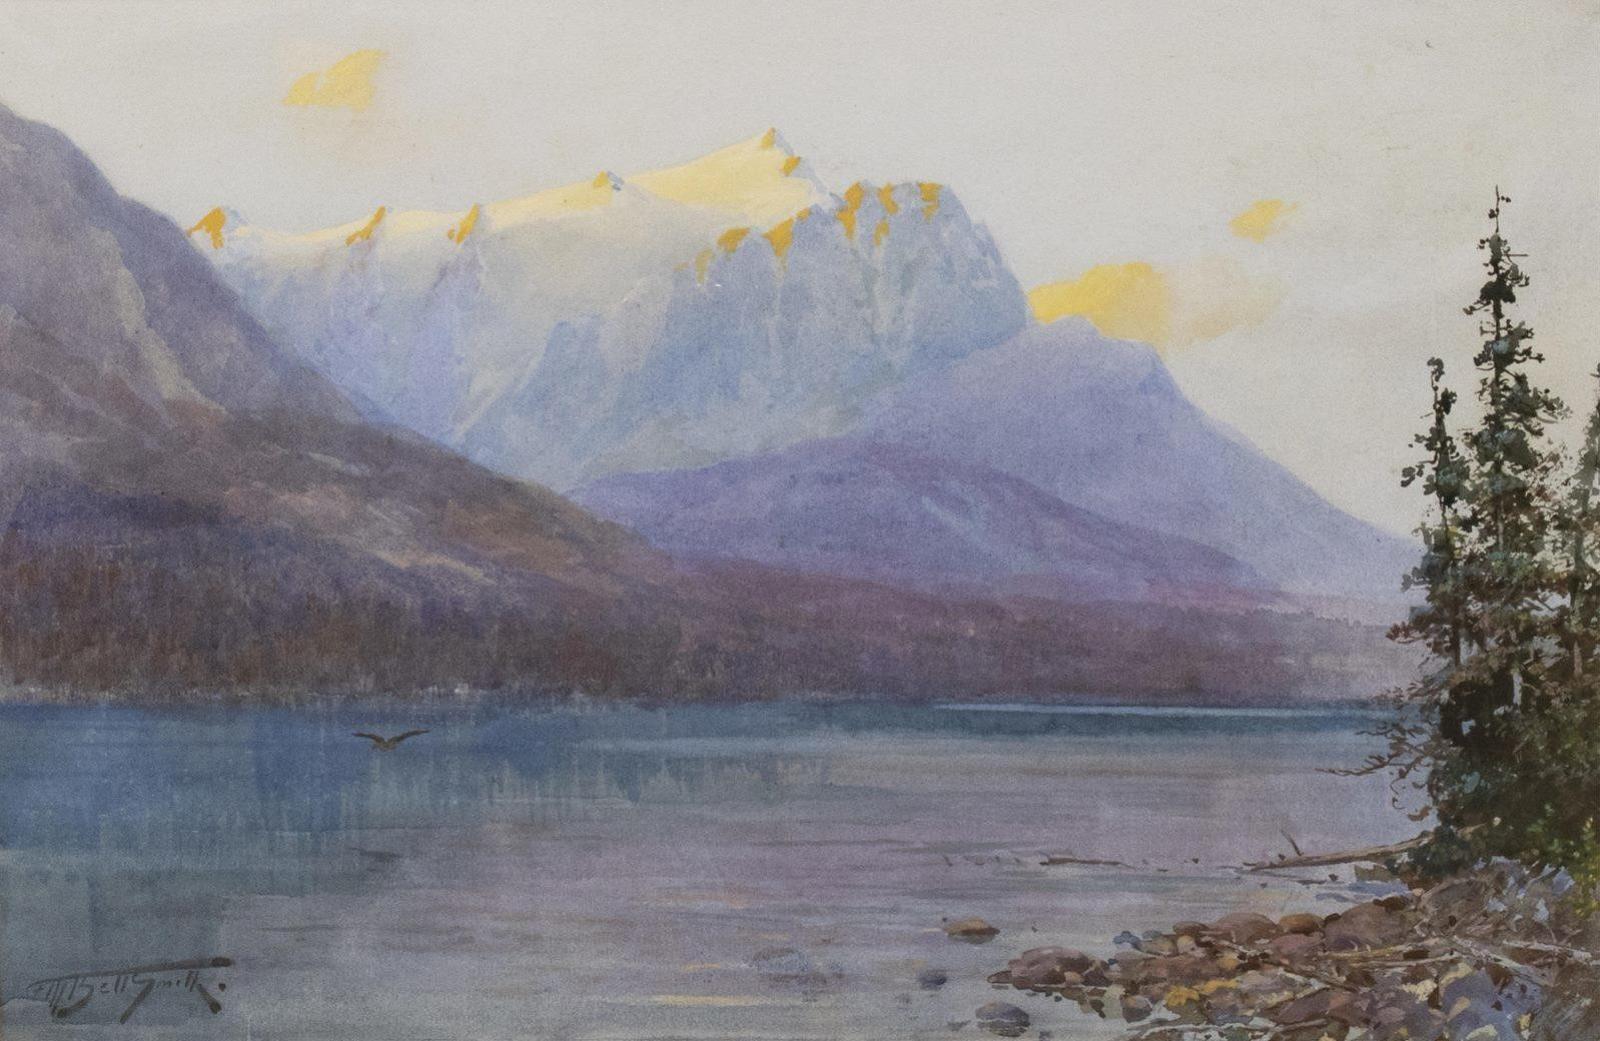 Frederic Martlett Bell-Smith (1846-1923) - Mountain Lake And Snow-Capped Ridge